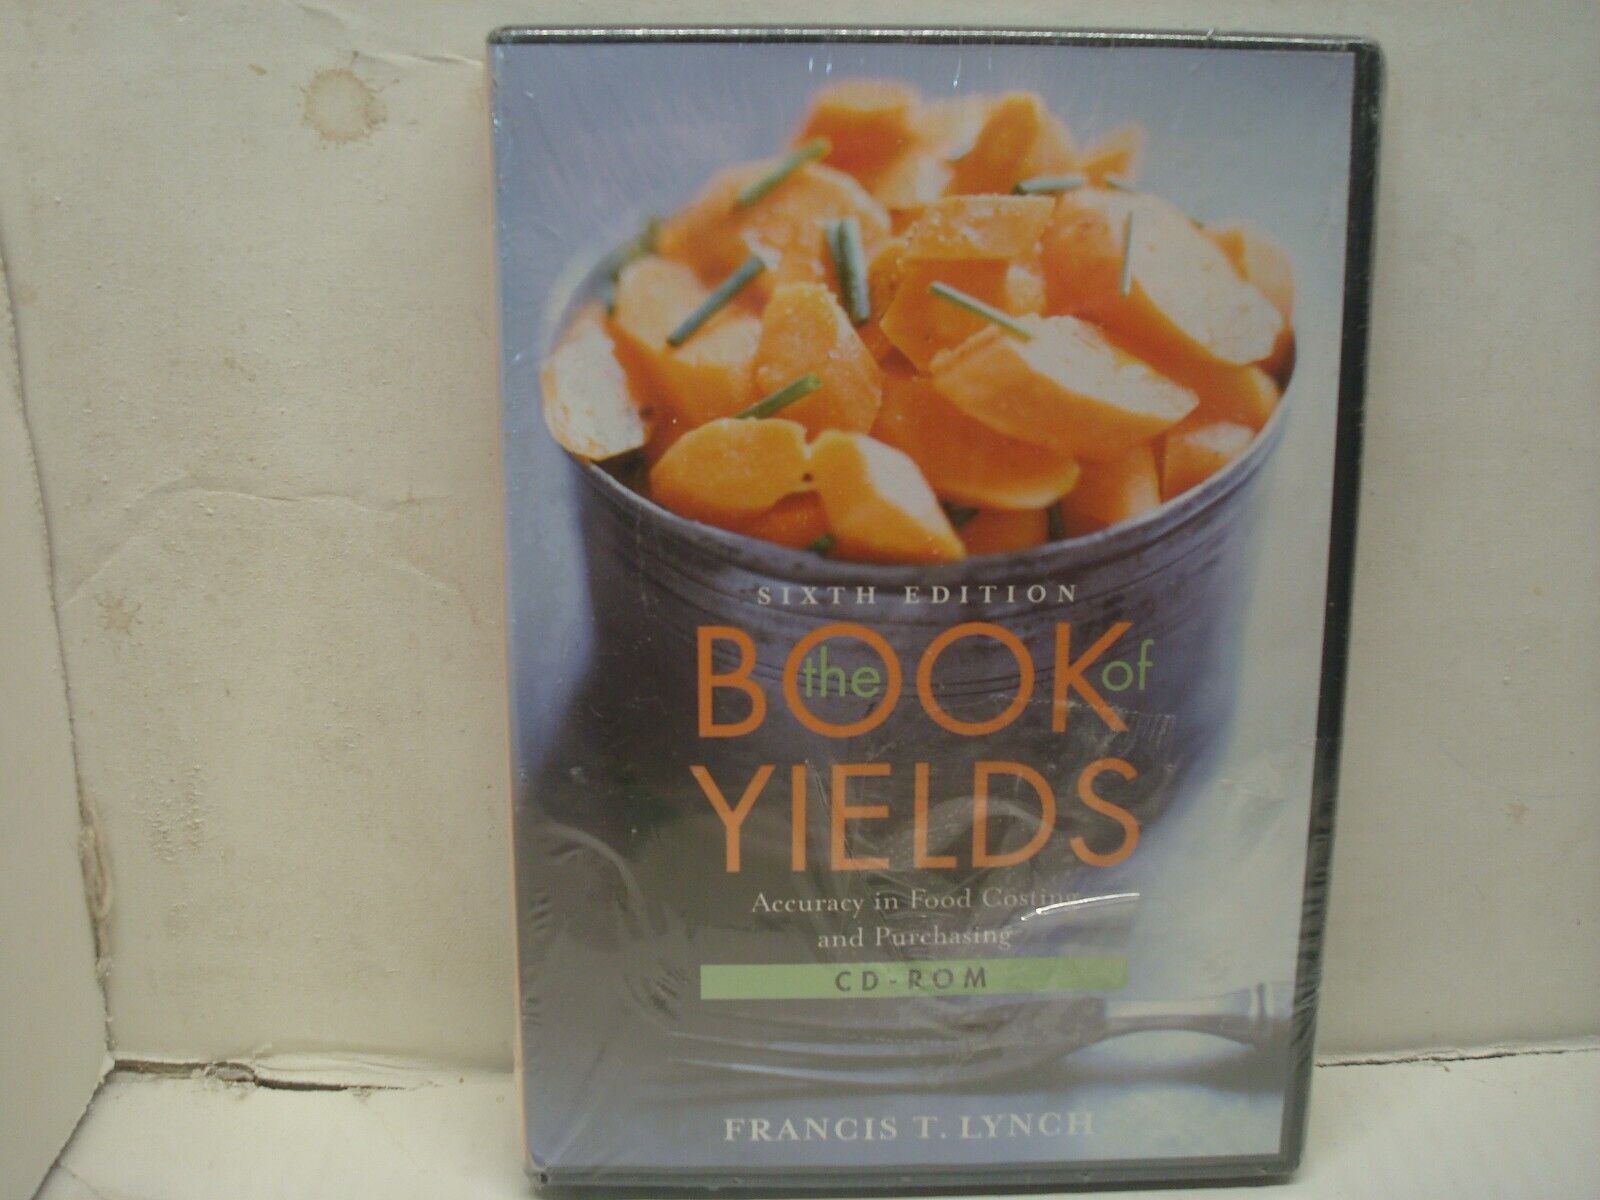 The Book Of Yields 6th Edition (2005 CD-ROM For Windows) NEW